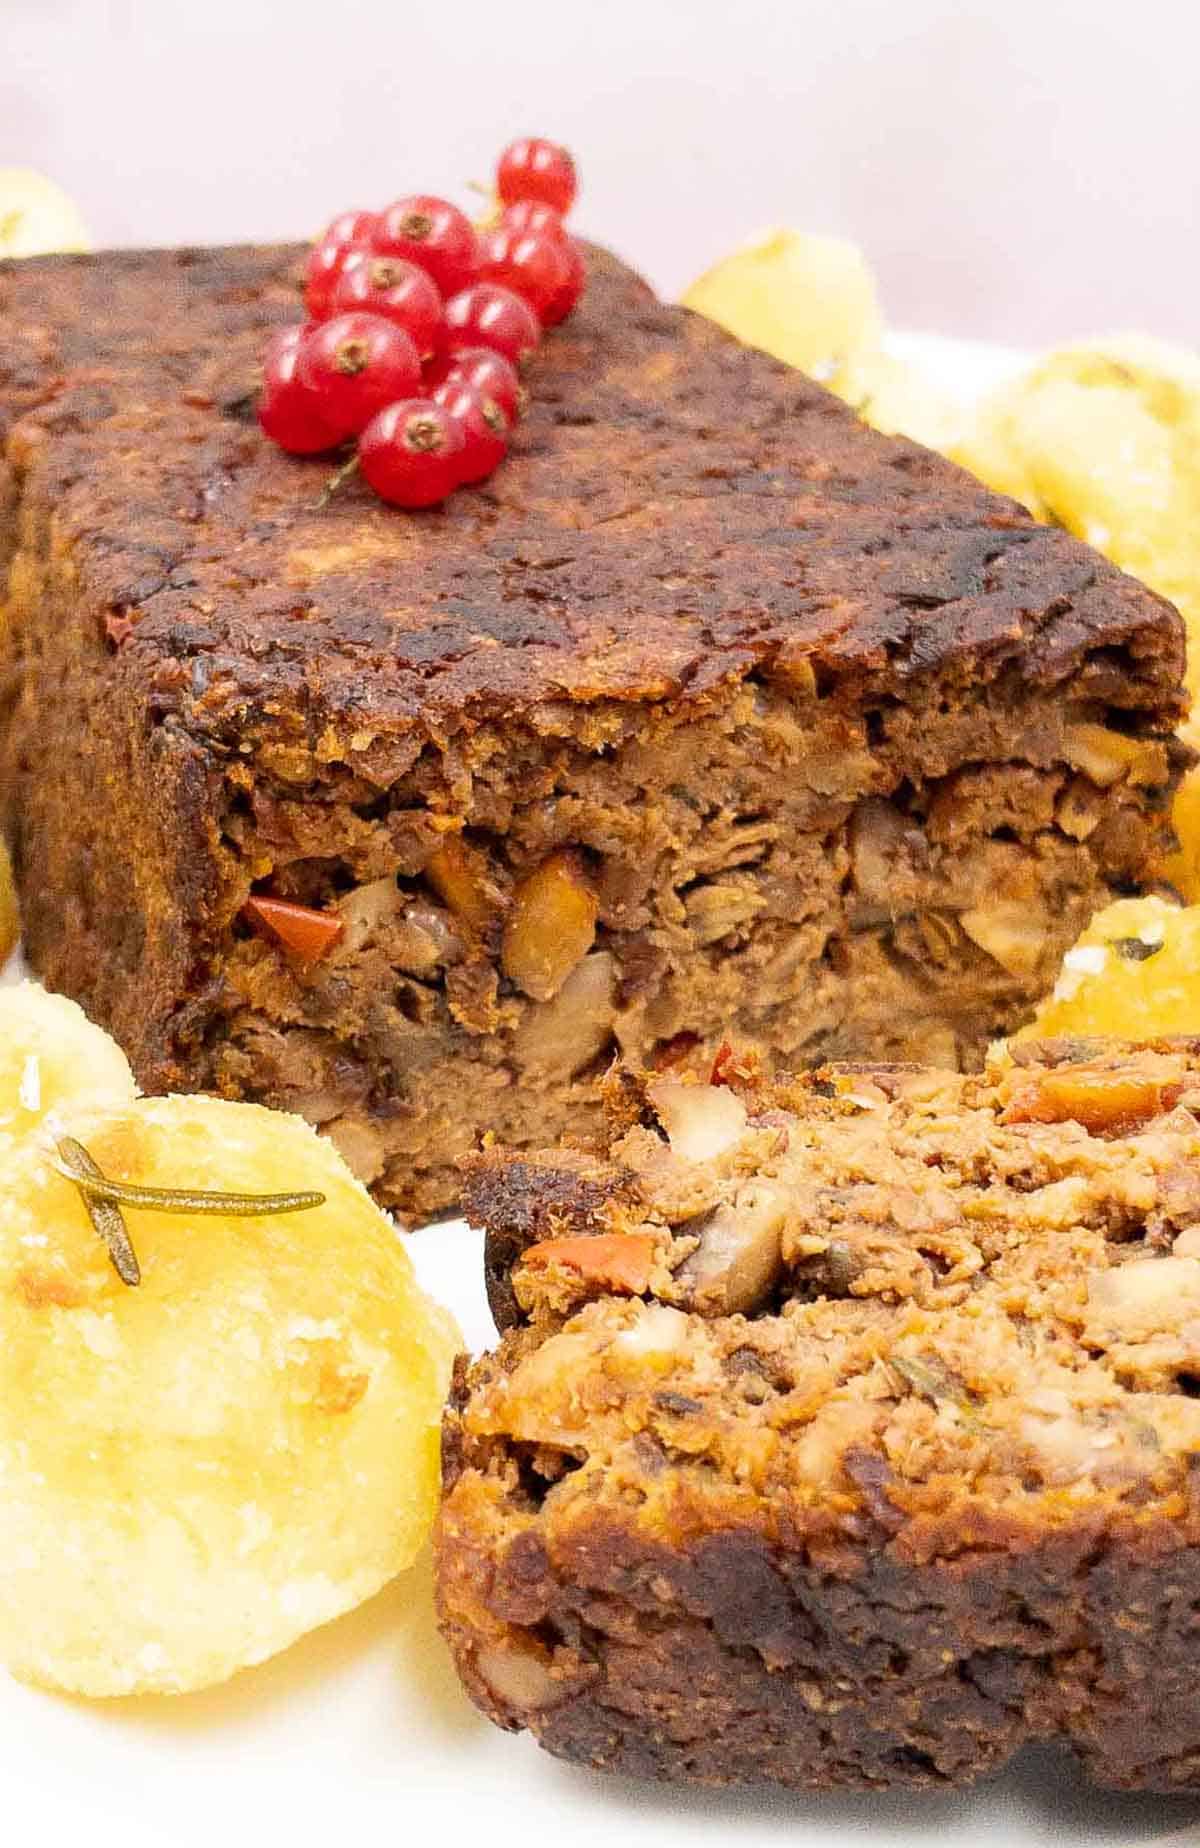 Delicious nut roast freshly cooked with roasted potatoes.